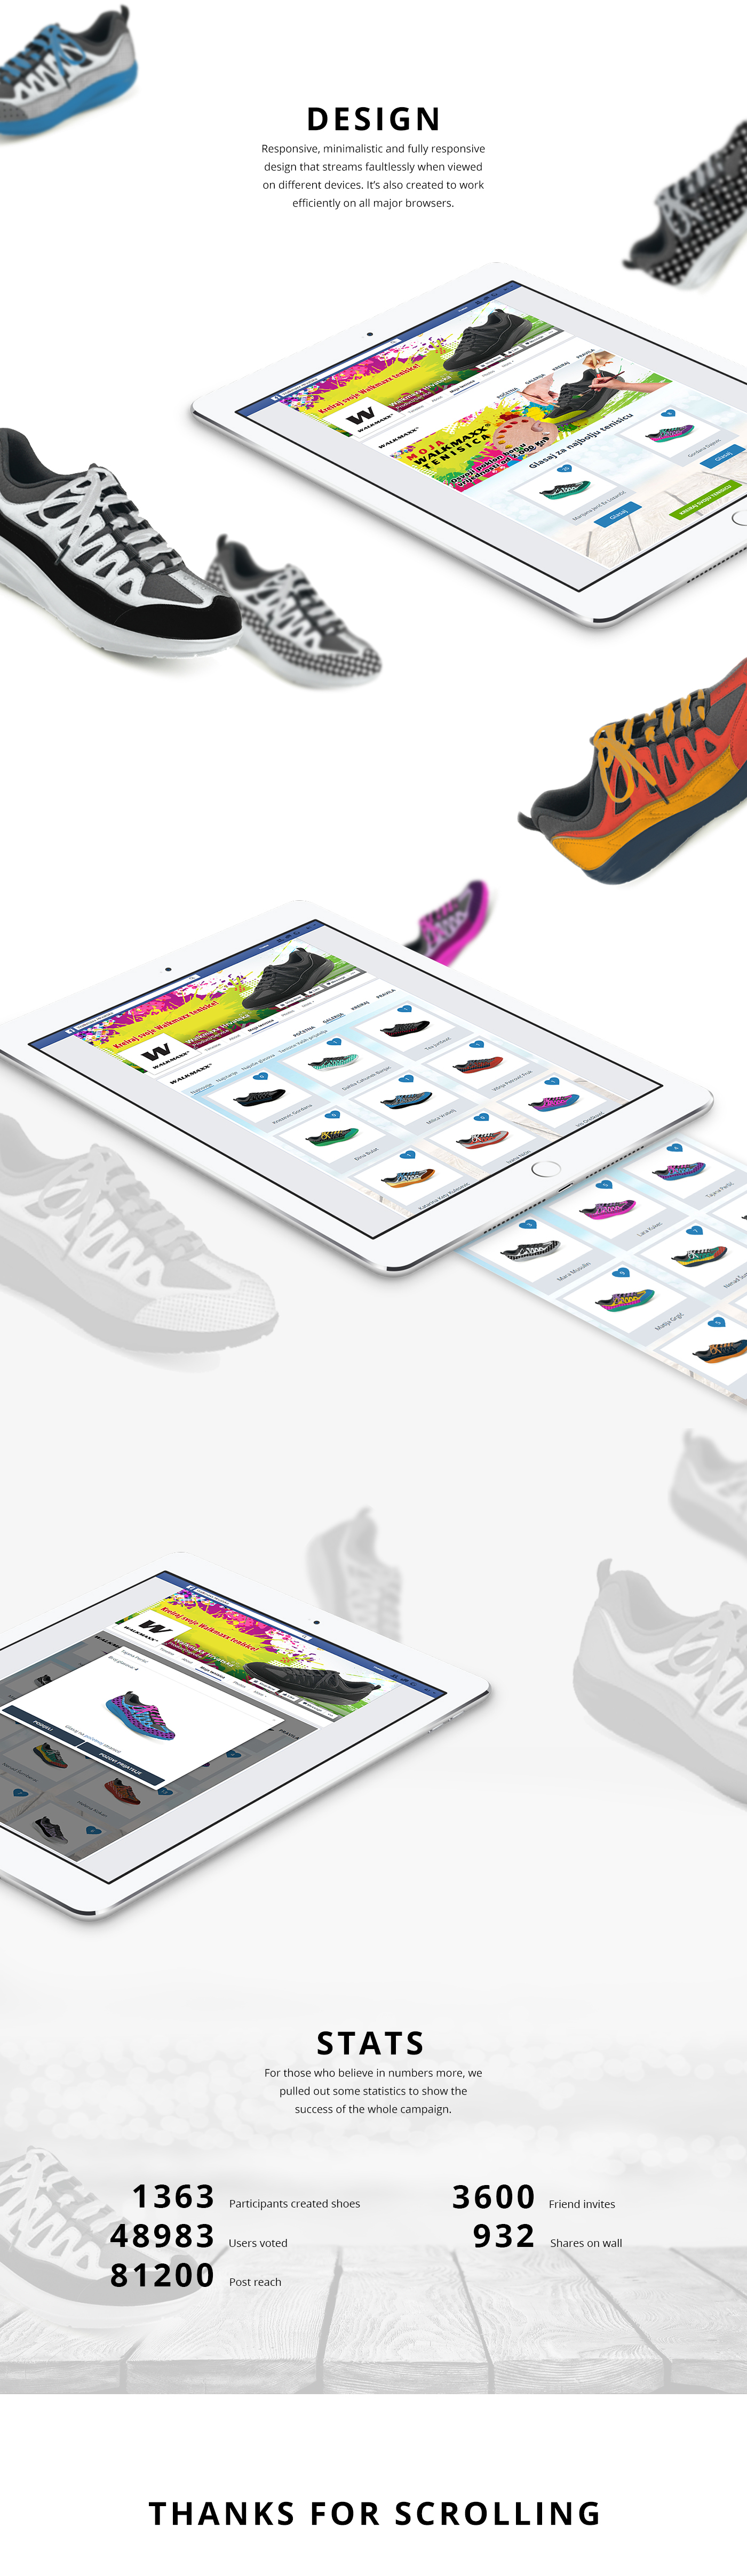 facebook application UI ux Web design interraction shoes body fitness development fan Like creative Competition